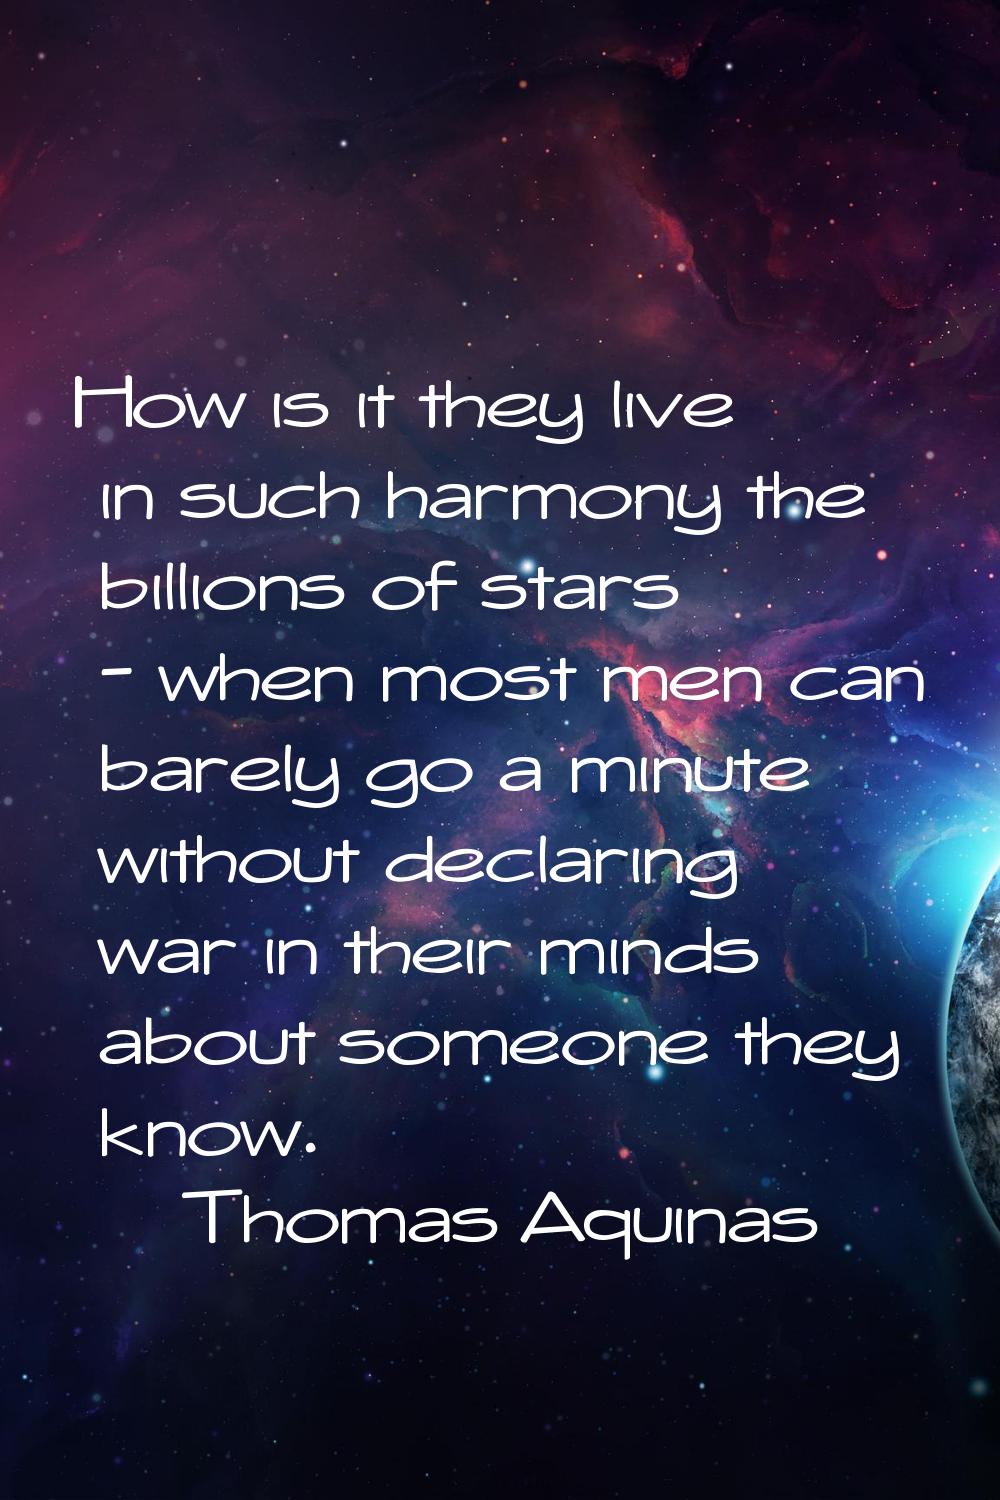 How is it they live in such harmony the billions of stars - when most men can barely go a minute wi